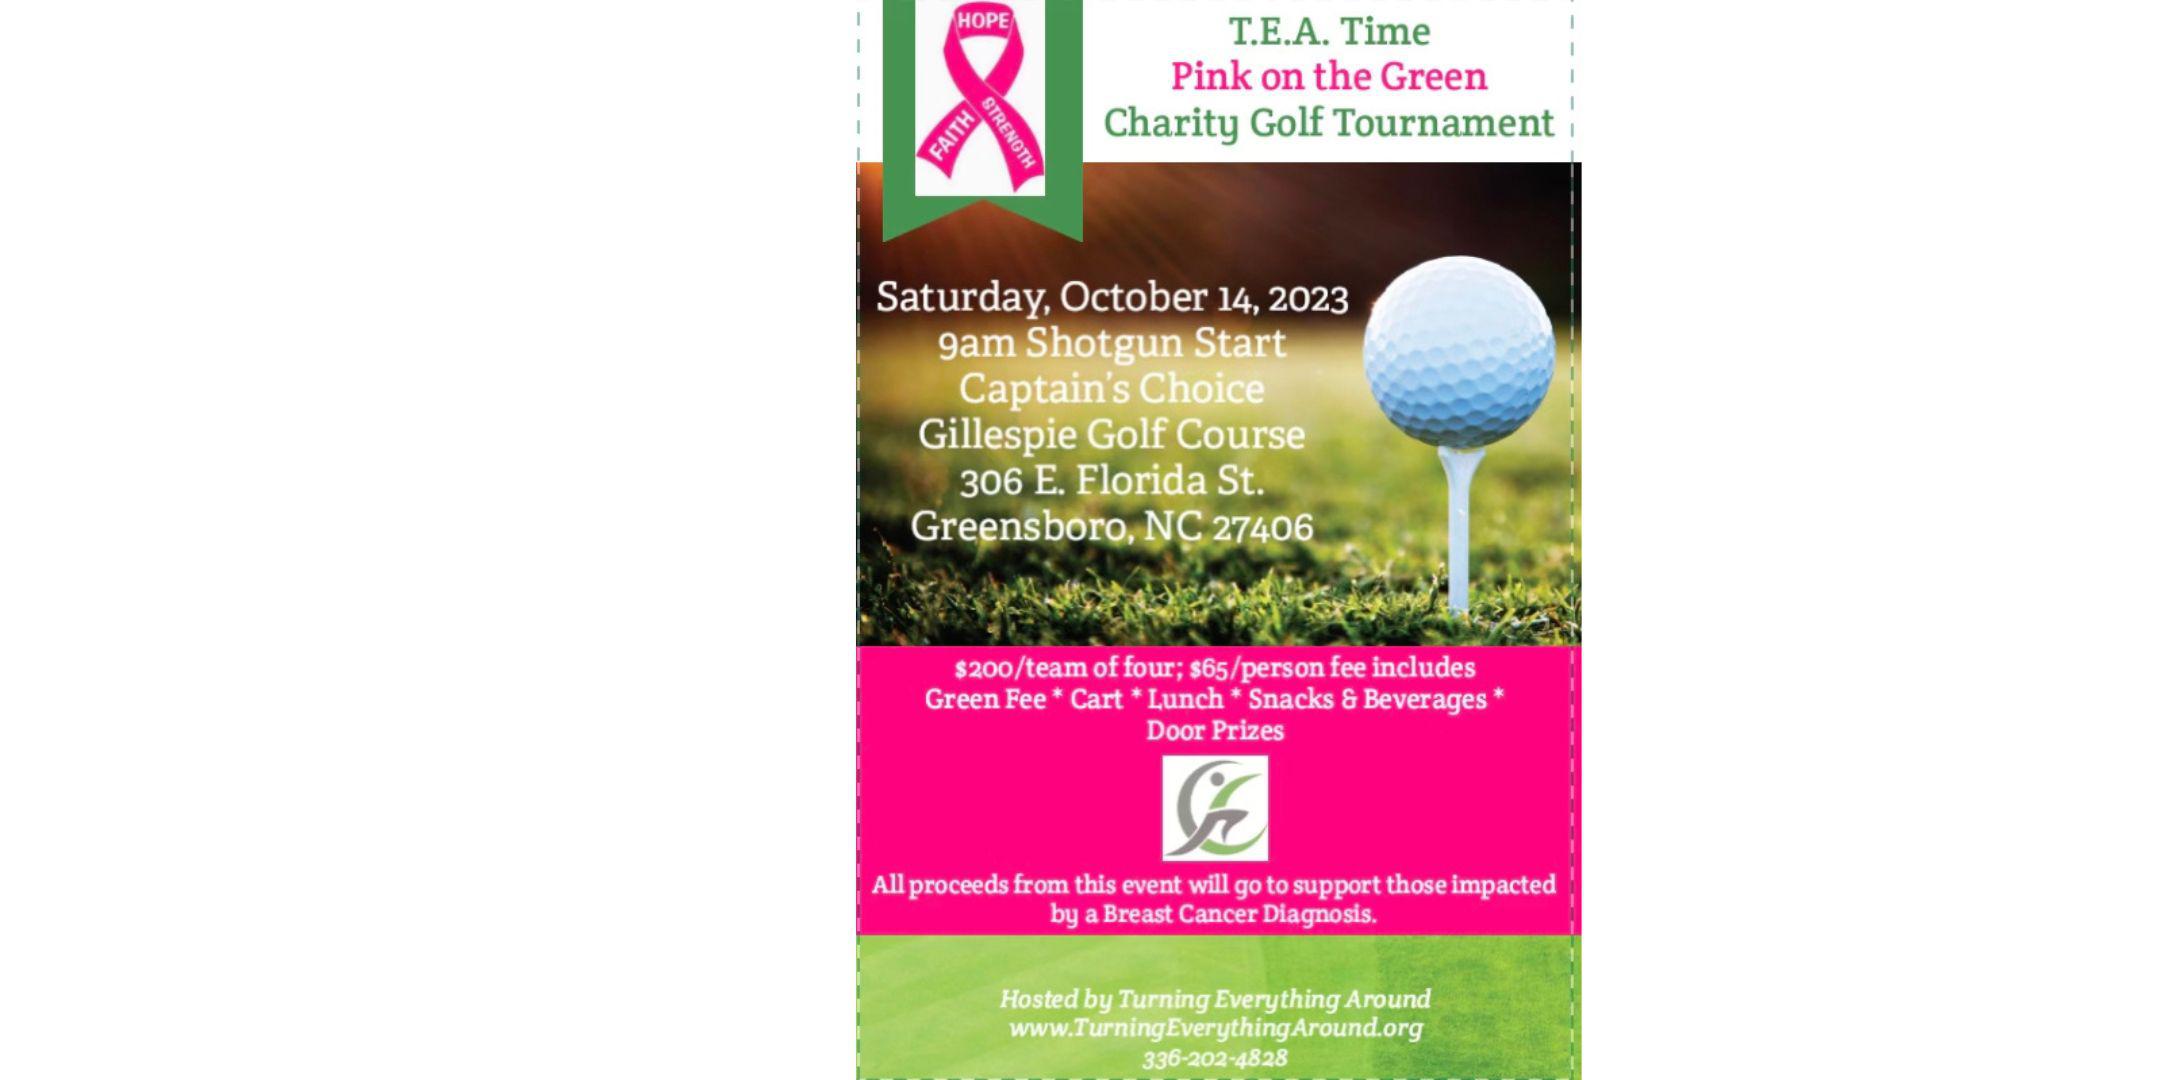 T.E.A. Time - Pink on the Green Charity Golf Tournament